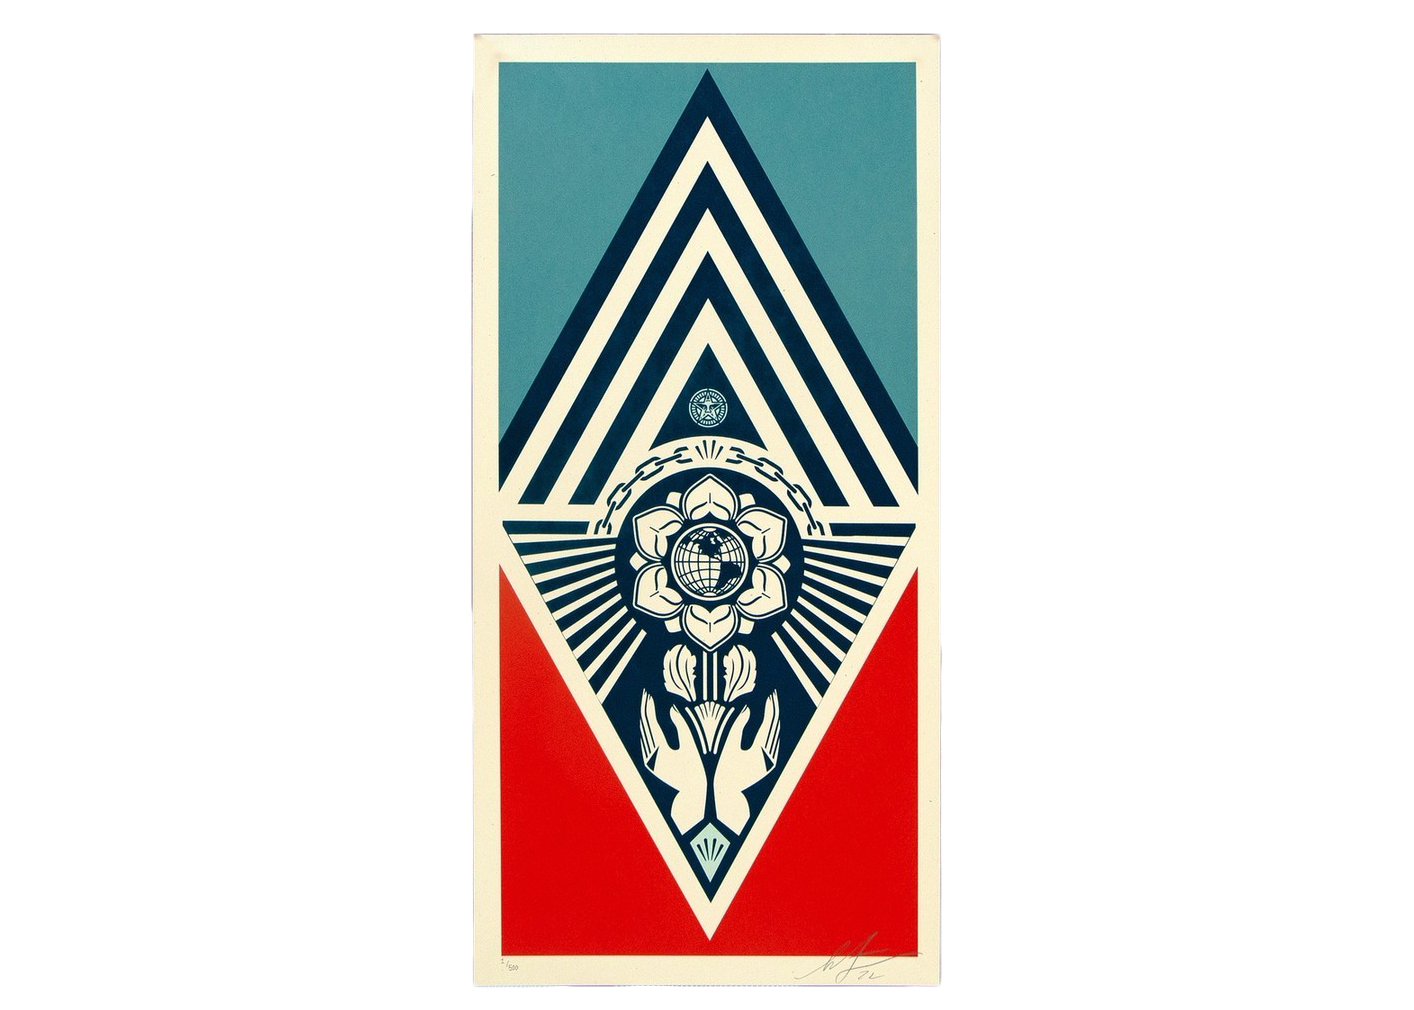 Shepard Fairey Cultivate Harmony Print (Signed, Edition of 500